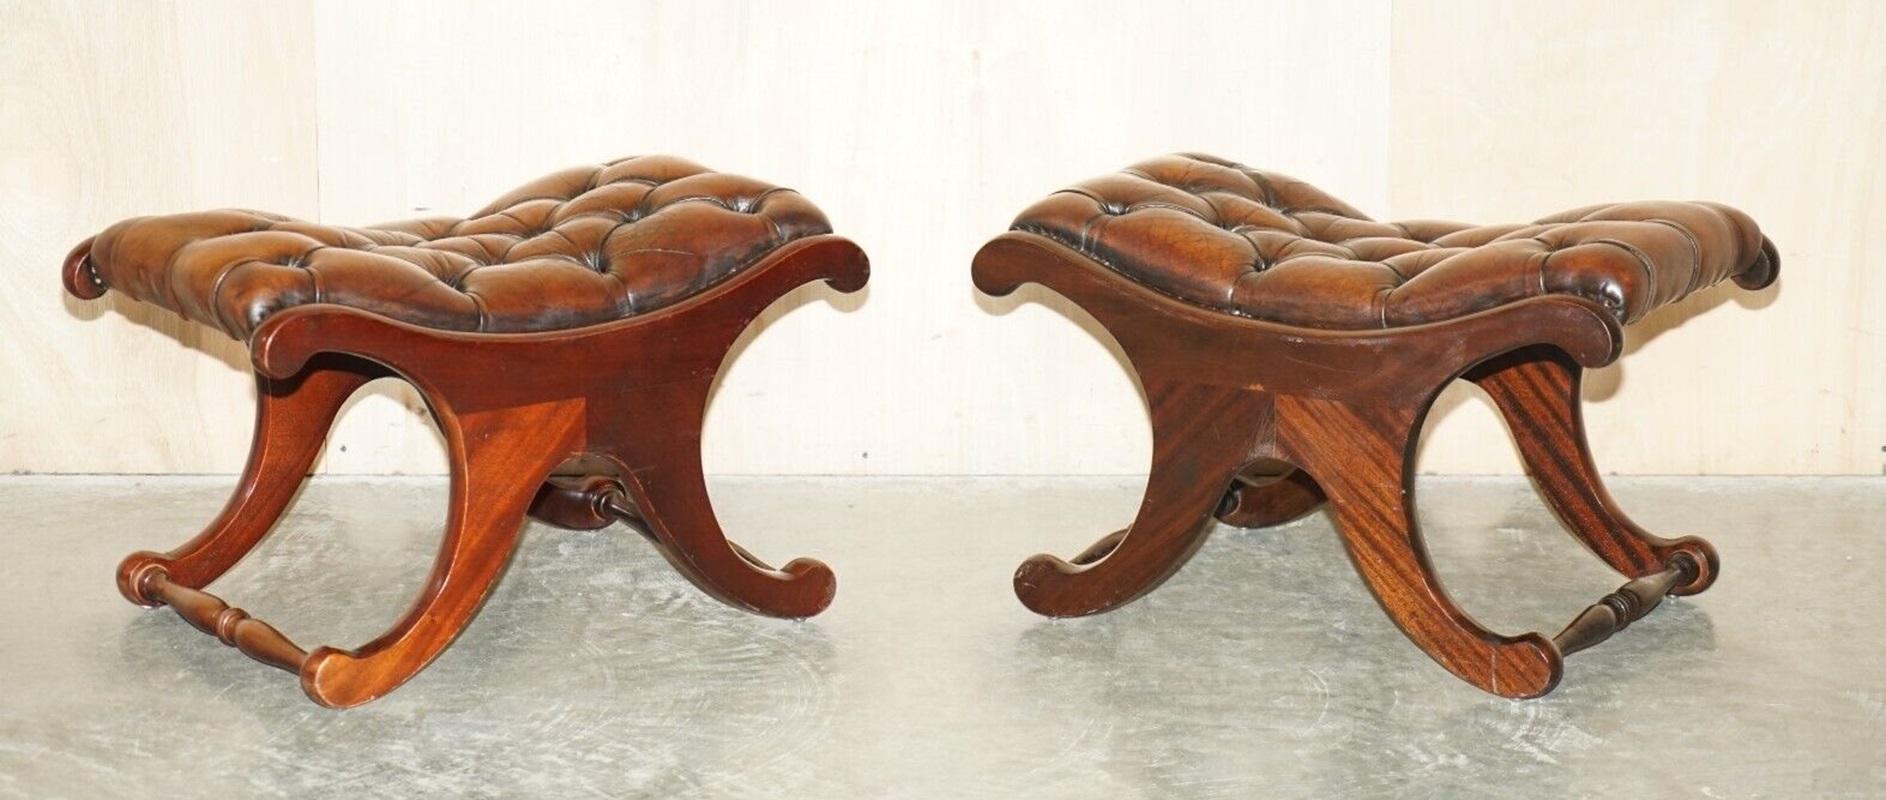 Royal House Antiques

Royal House Antiques is delighted to offer for sale this absolutely stunning pair of original circa 1930's Art Deco, super comfortable hand dyed saddle brown leather footstools with Chesterfield tufting

Please note the